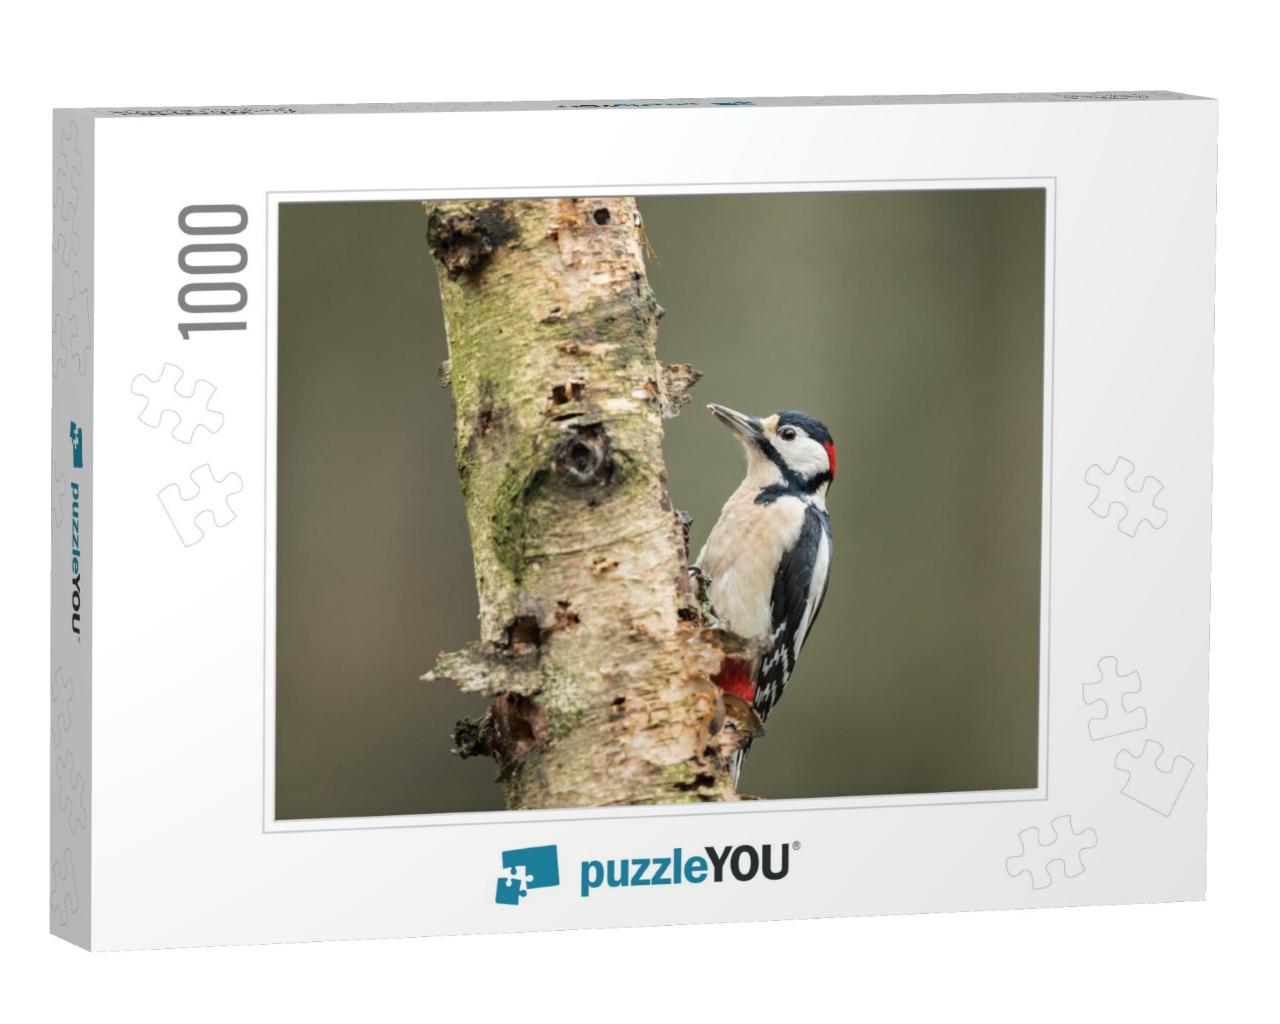 Great Spotted Woodpecker Sitting on a Birch Tree - Grote... Jigsaw Puzzle with 1000 pieces